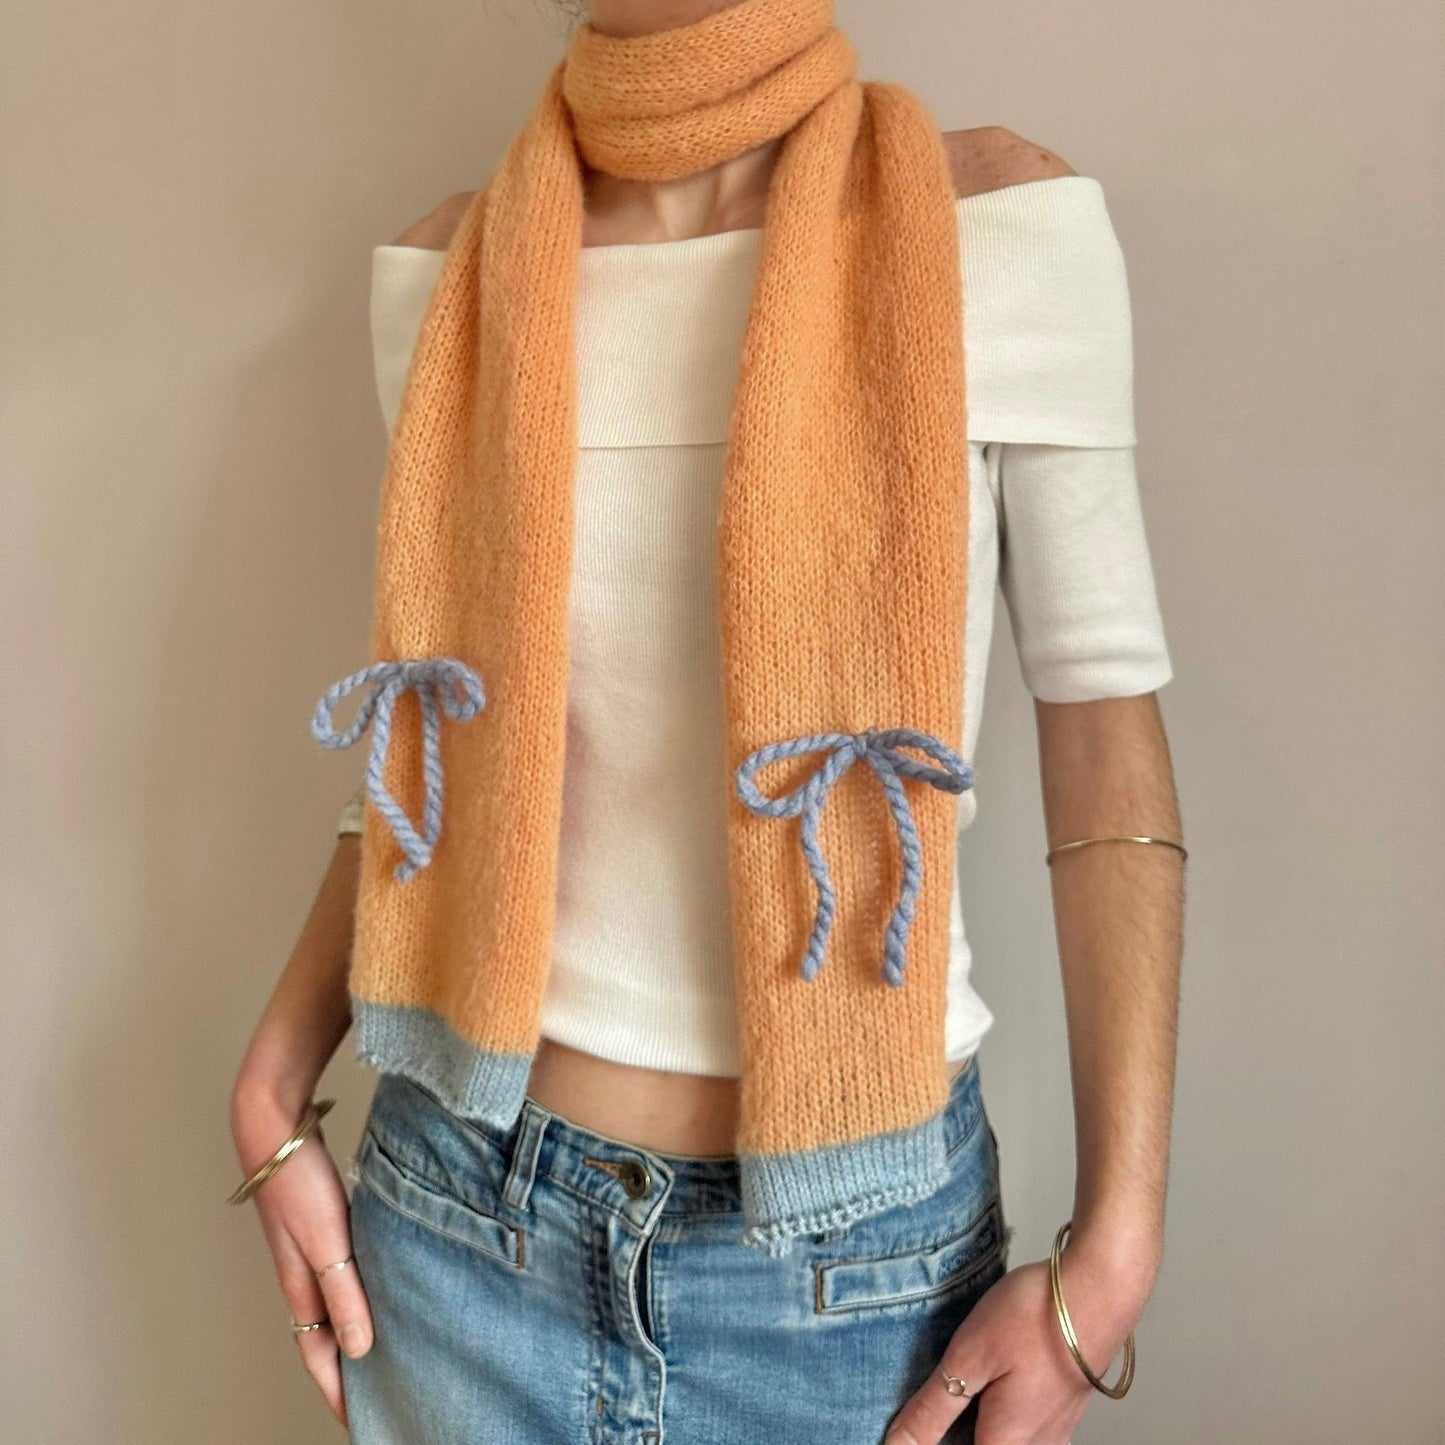 Handmade knitted orange and baby blue mohair bow scarf